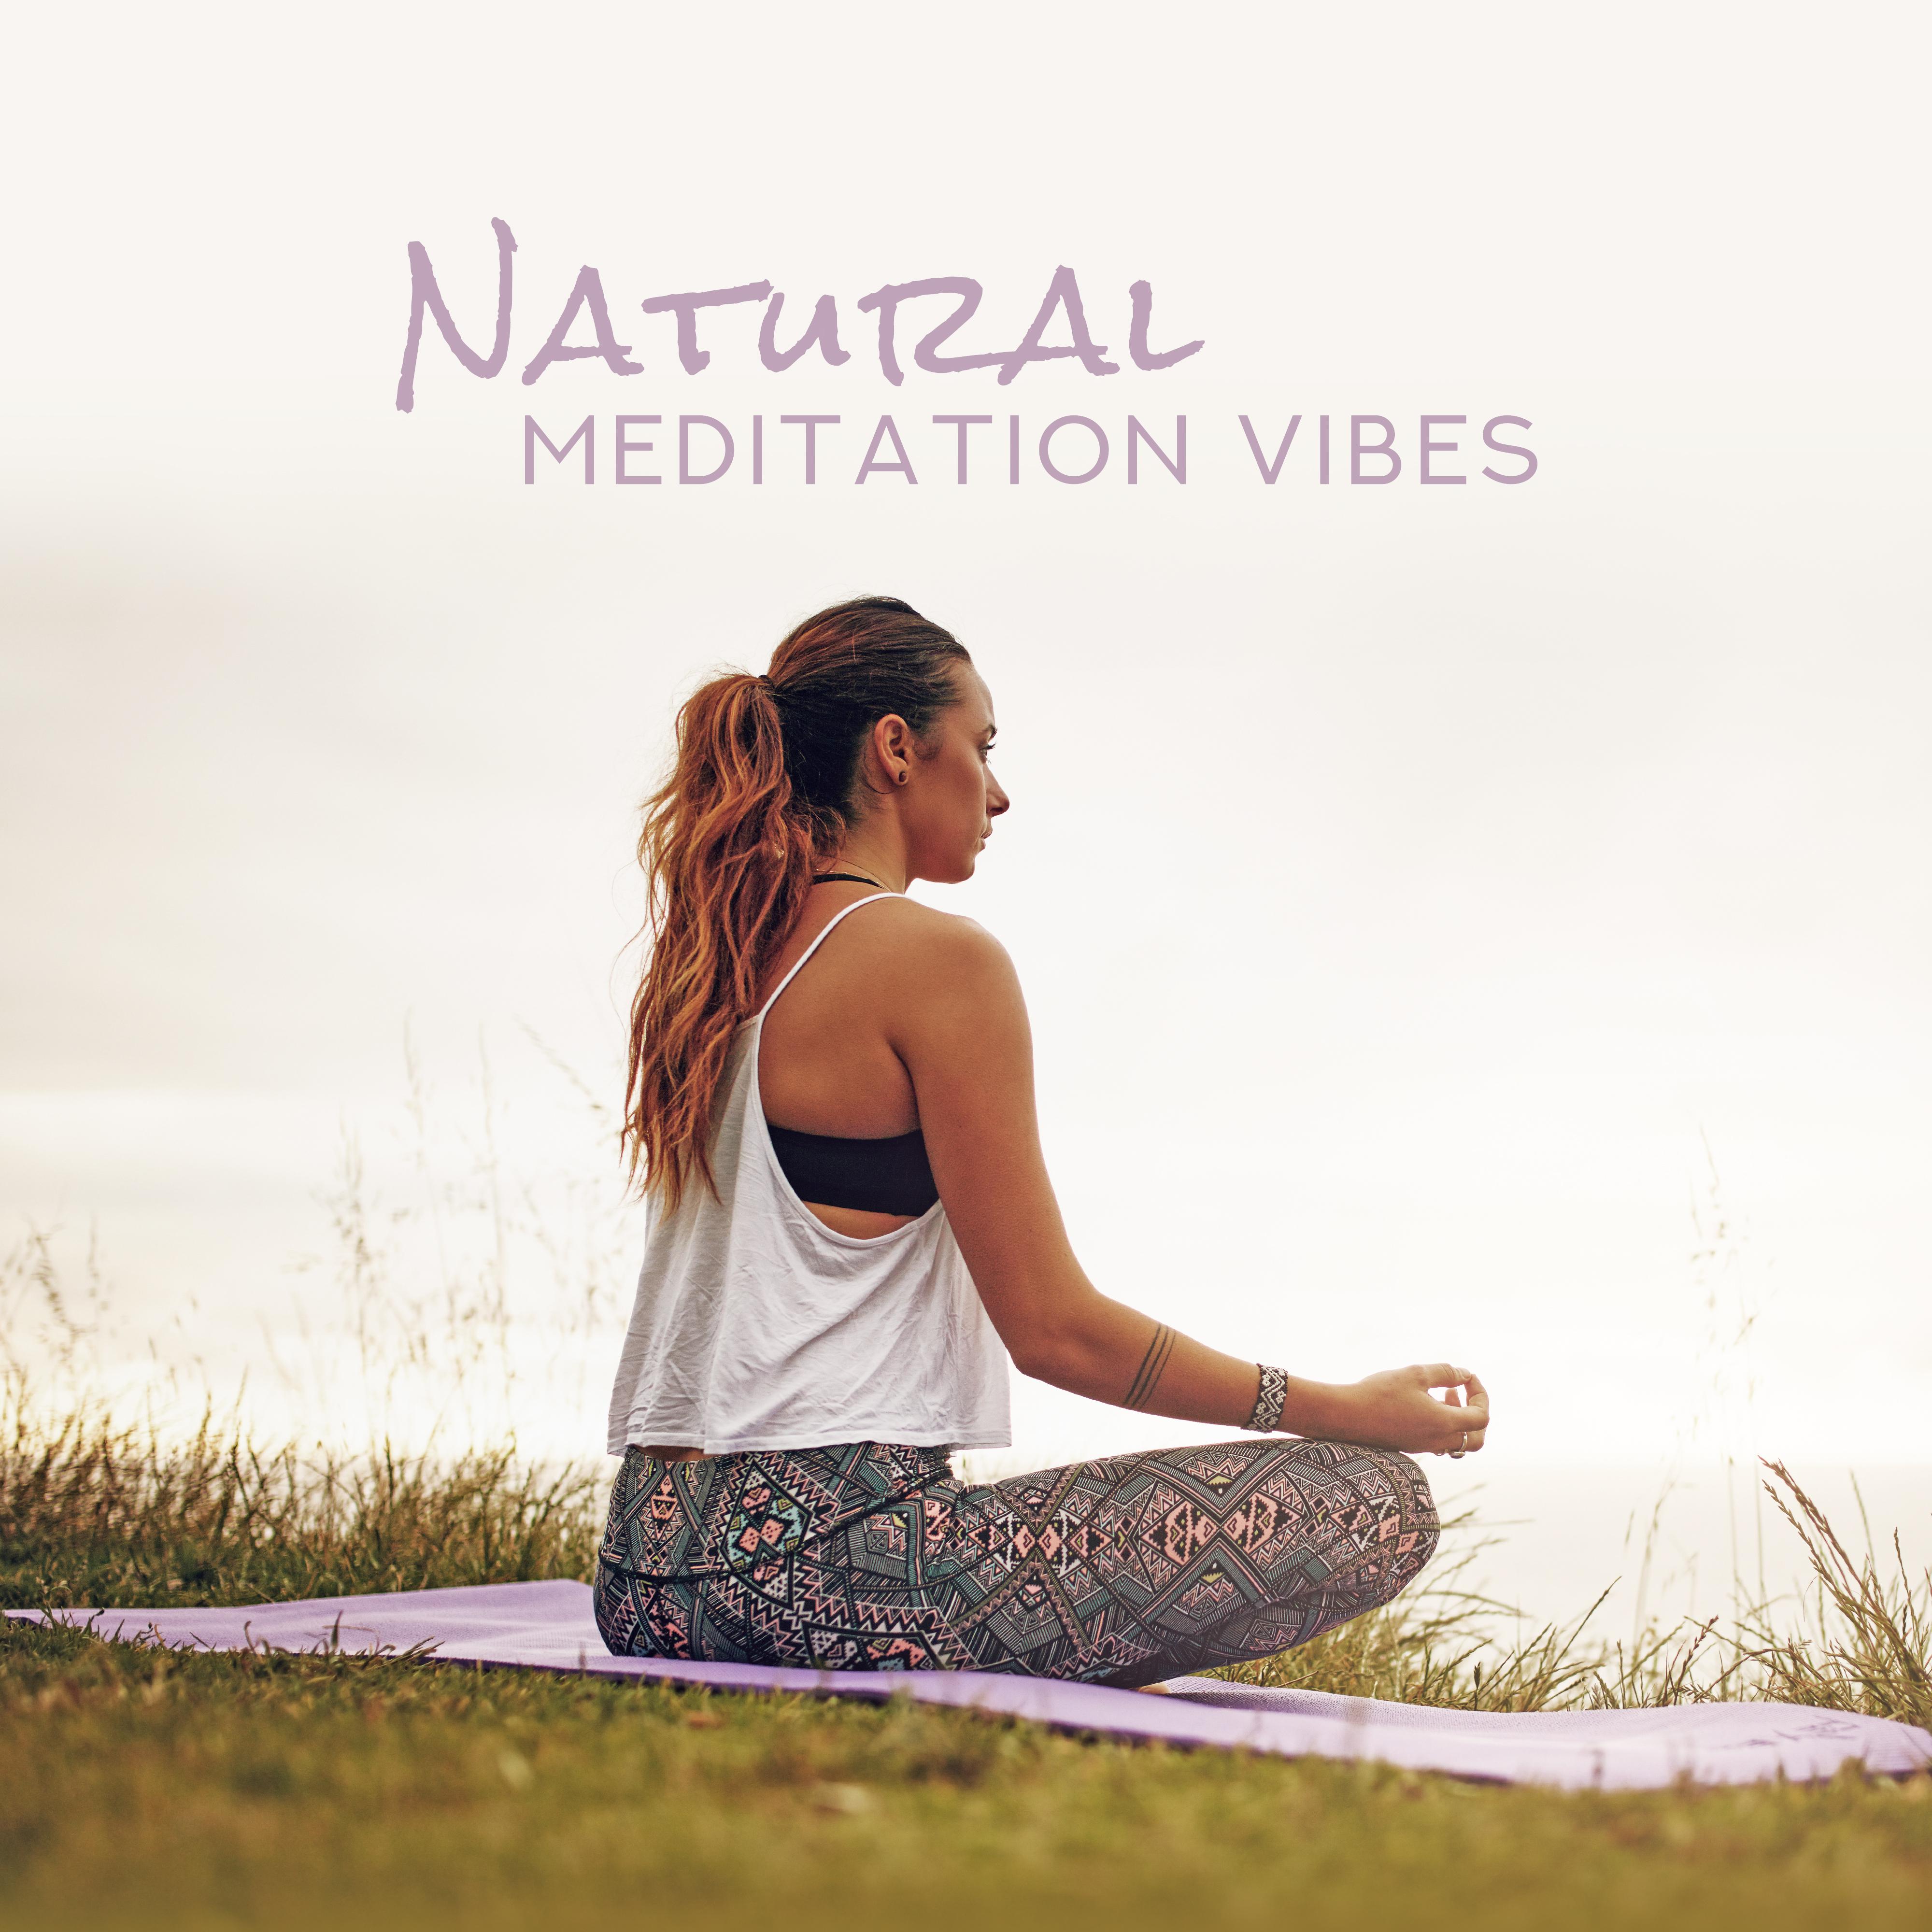 Natural Meditation Vibes: Zen Mantra, Spiritual Journey, Mindfulness Therapy, Peace and Tranquility, Deep Meditation, Sounds of Nature